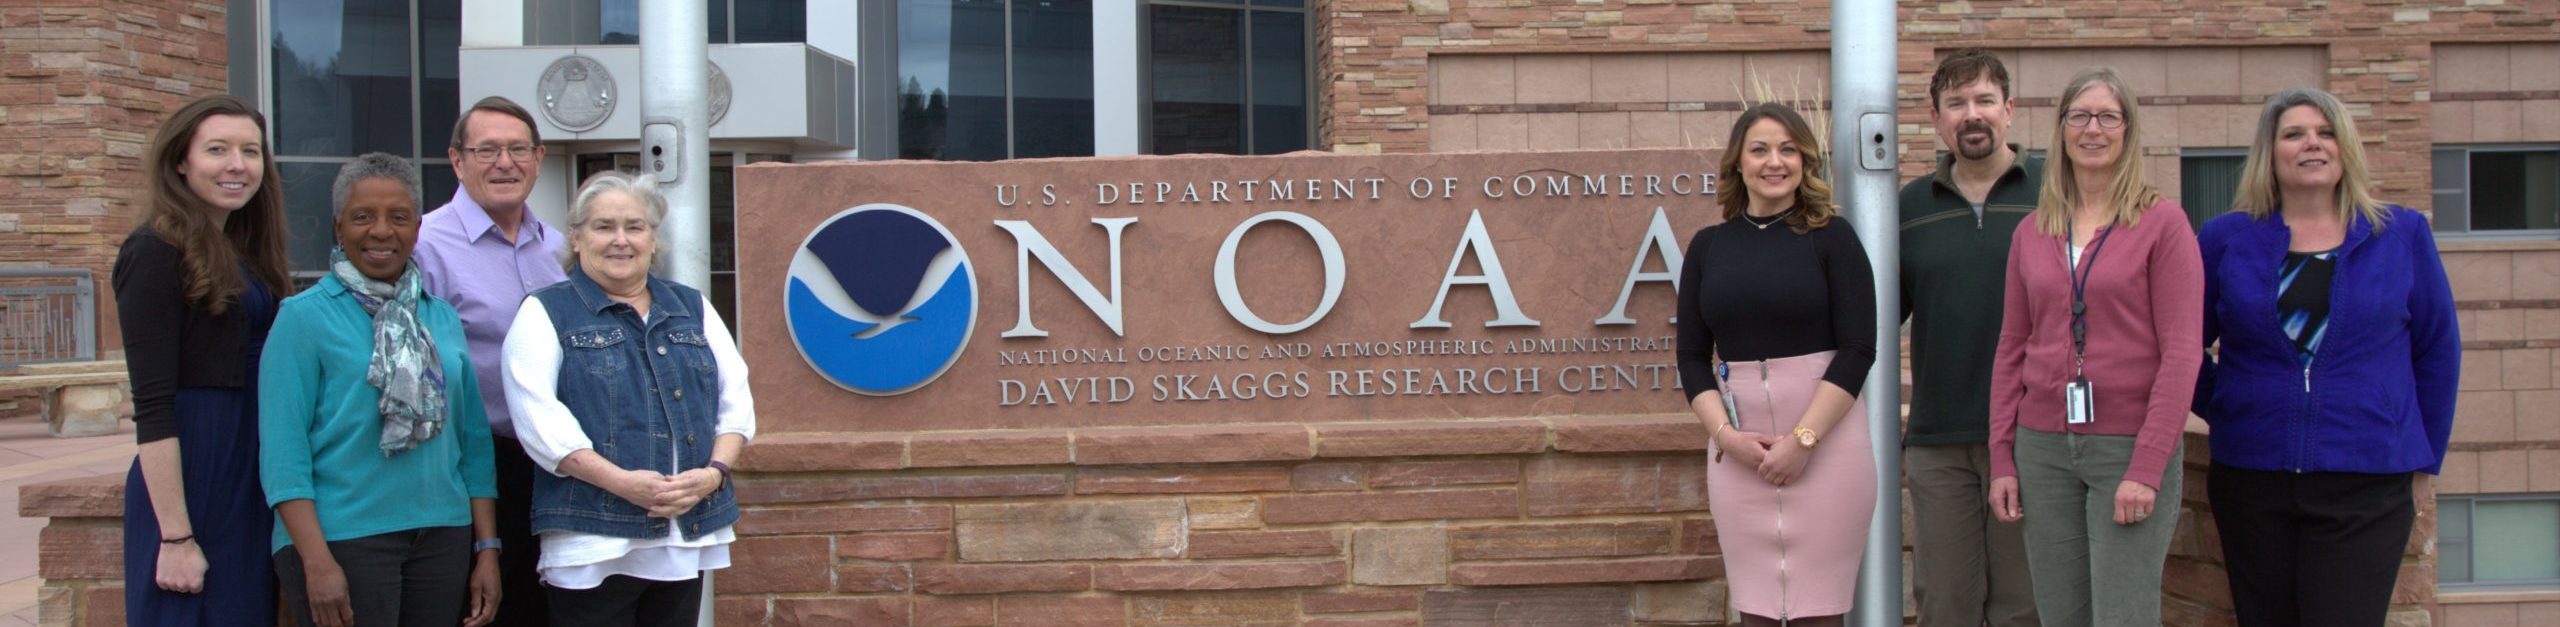 FedWriters team standing outside NOAA's (National Oceanic and Atmospheric Administration) David Skaggs Research Center in Boulder, Colorado